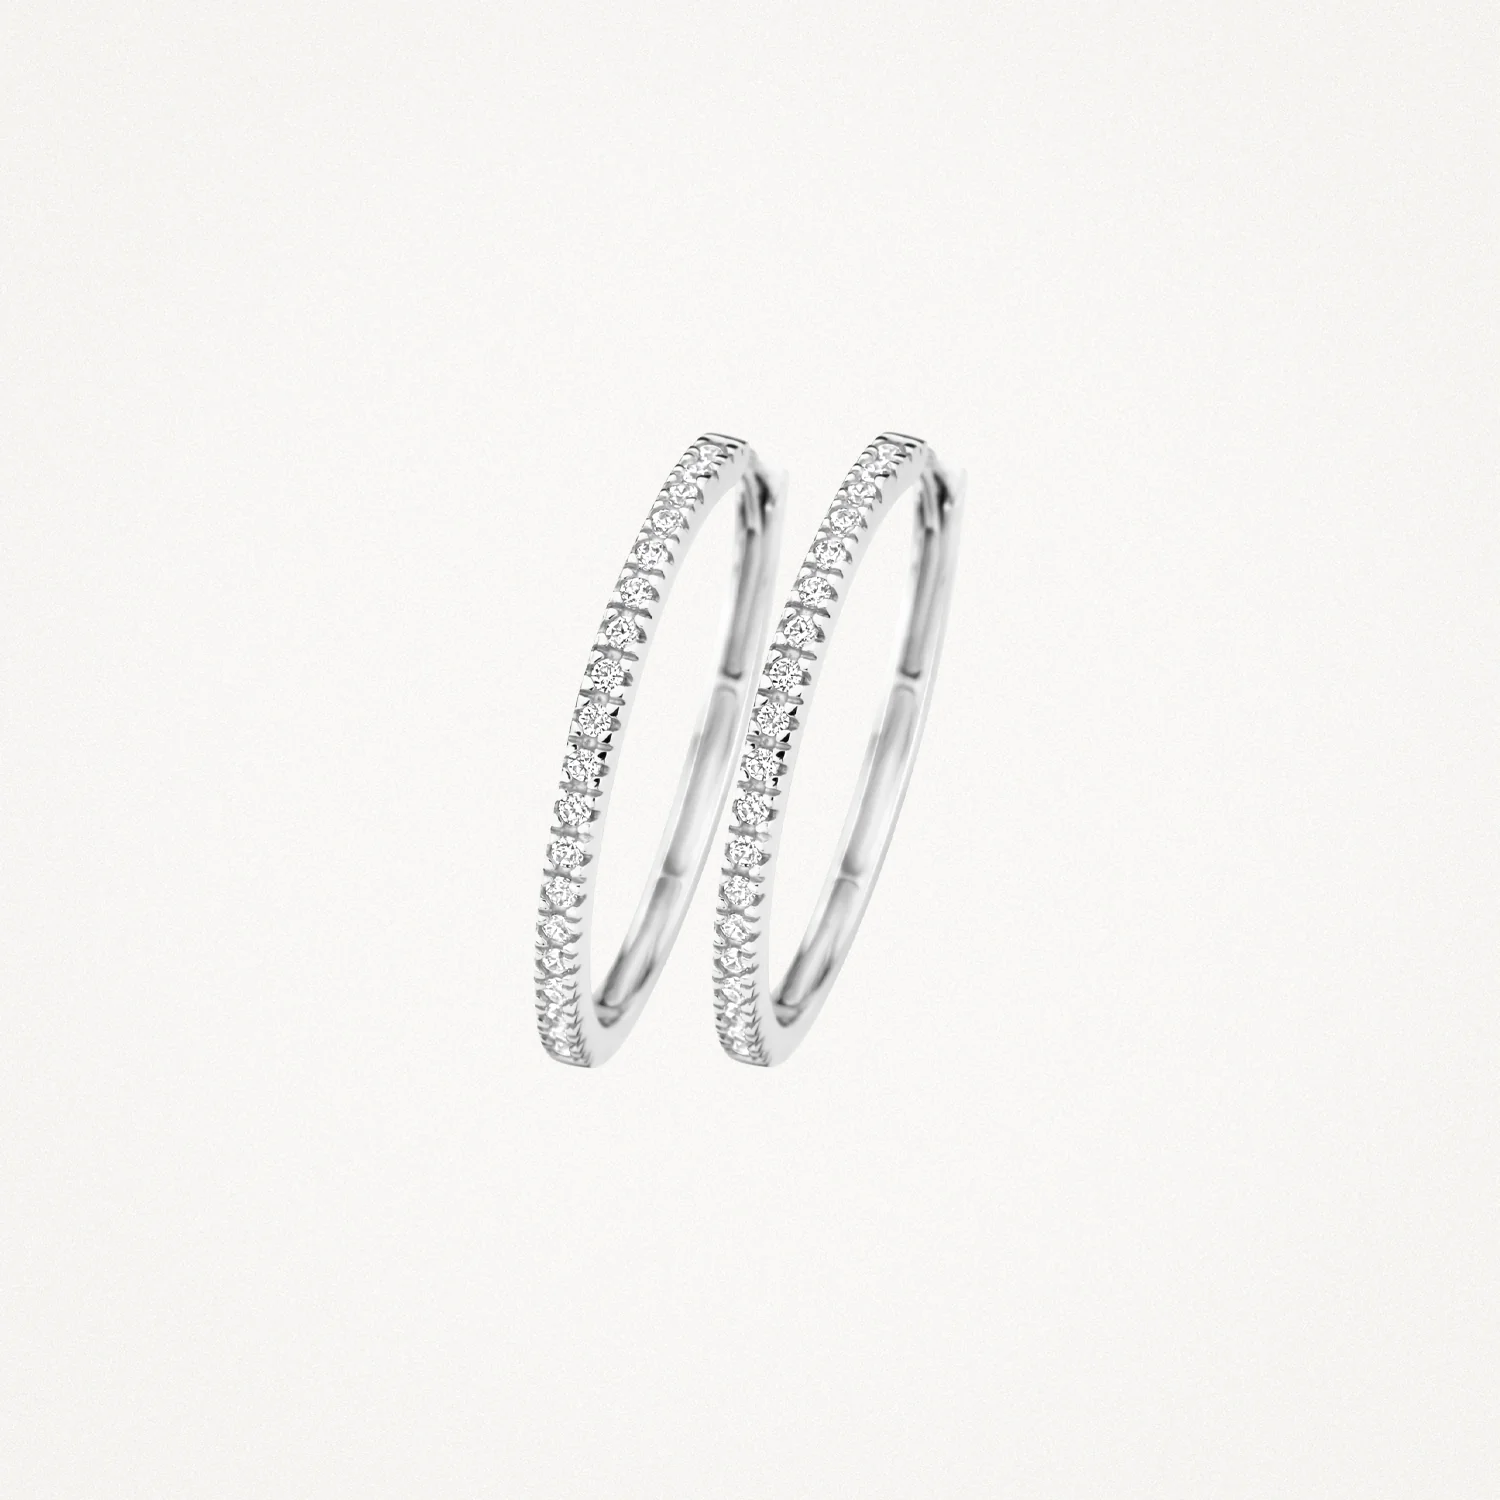 Blush Pave CZ & White Gold Hoop Earrings - 20mm